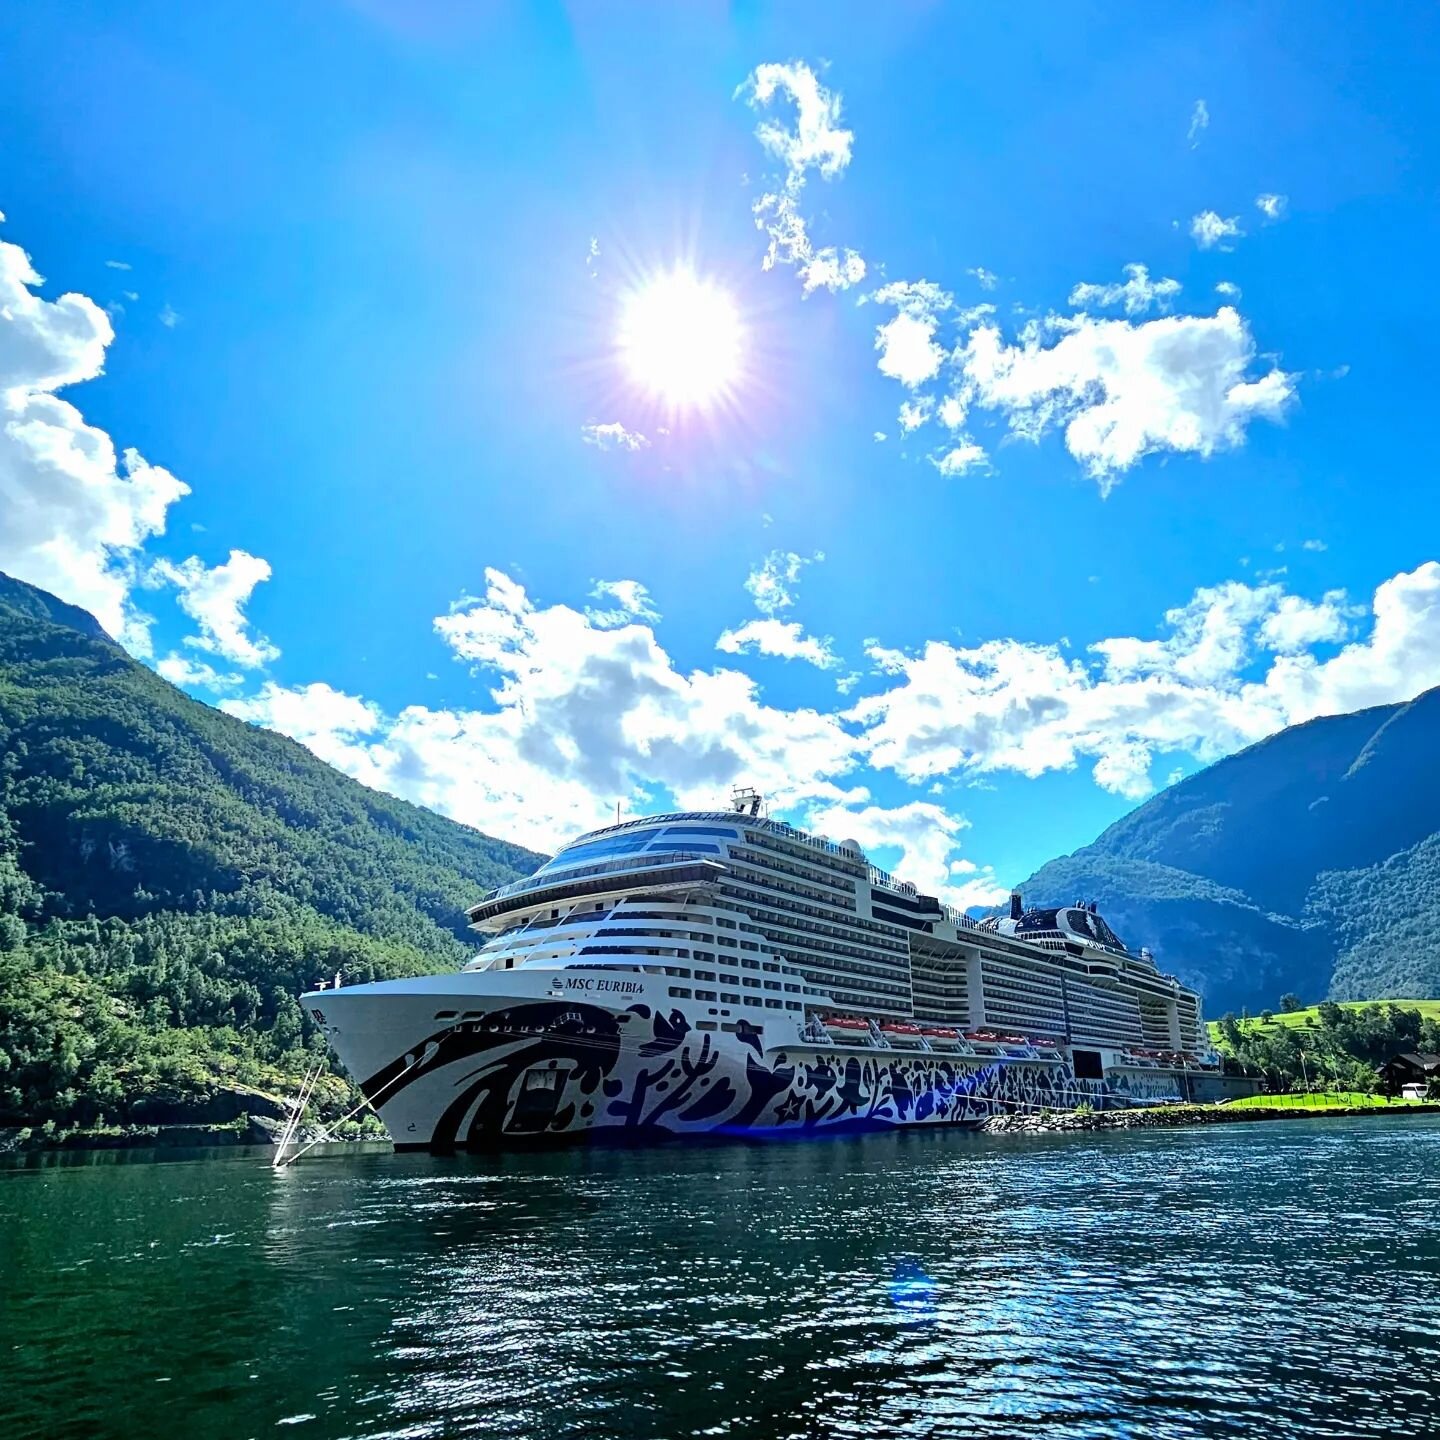 MSC Euribia in Fl&aring;m&hearts;️

Did you know that MSC Euribia is nominated to the @seatradecruise awards as the sustainable initiative of the year?

#savetheseas

#cruise #flamport #flamcruiseport #nature #sustainableawards #seatrade #nature #wor